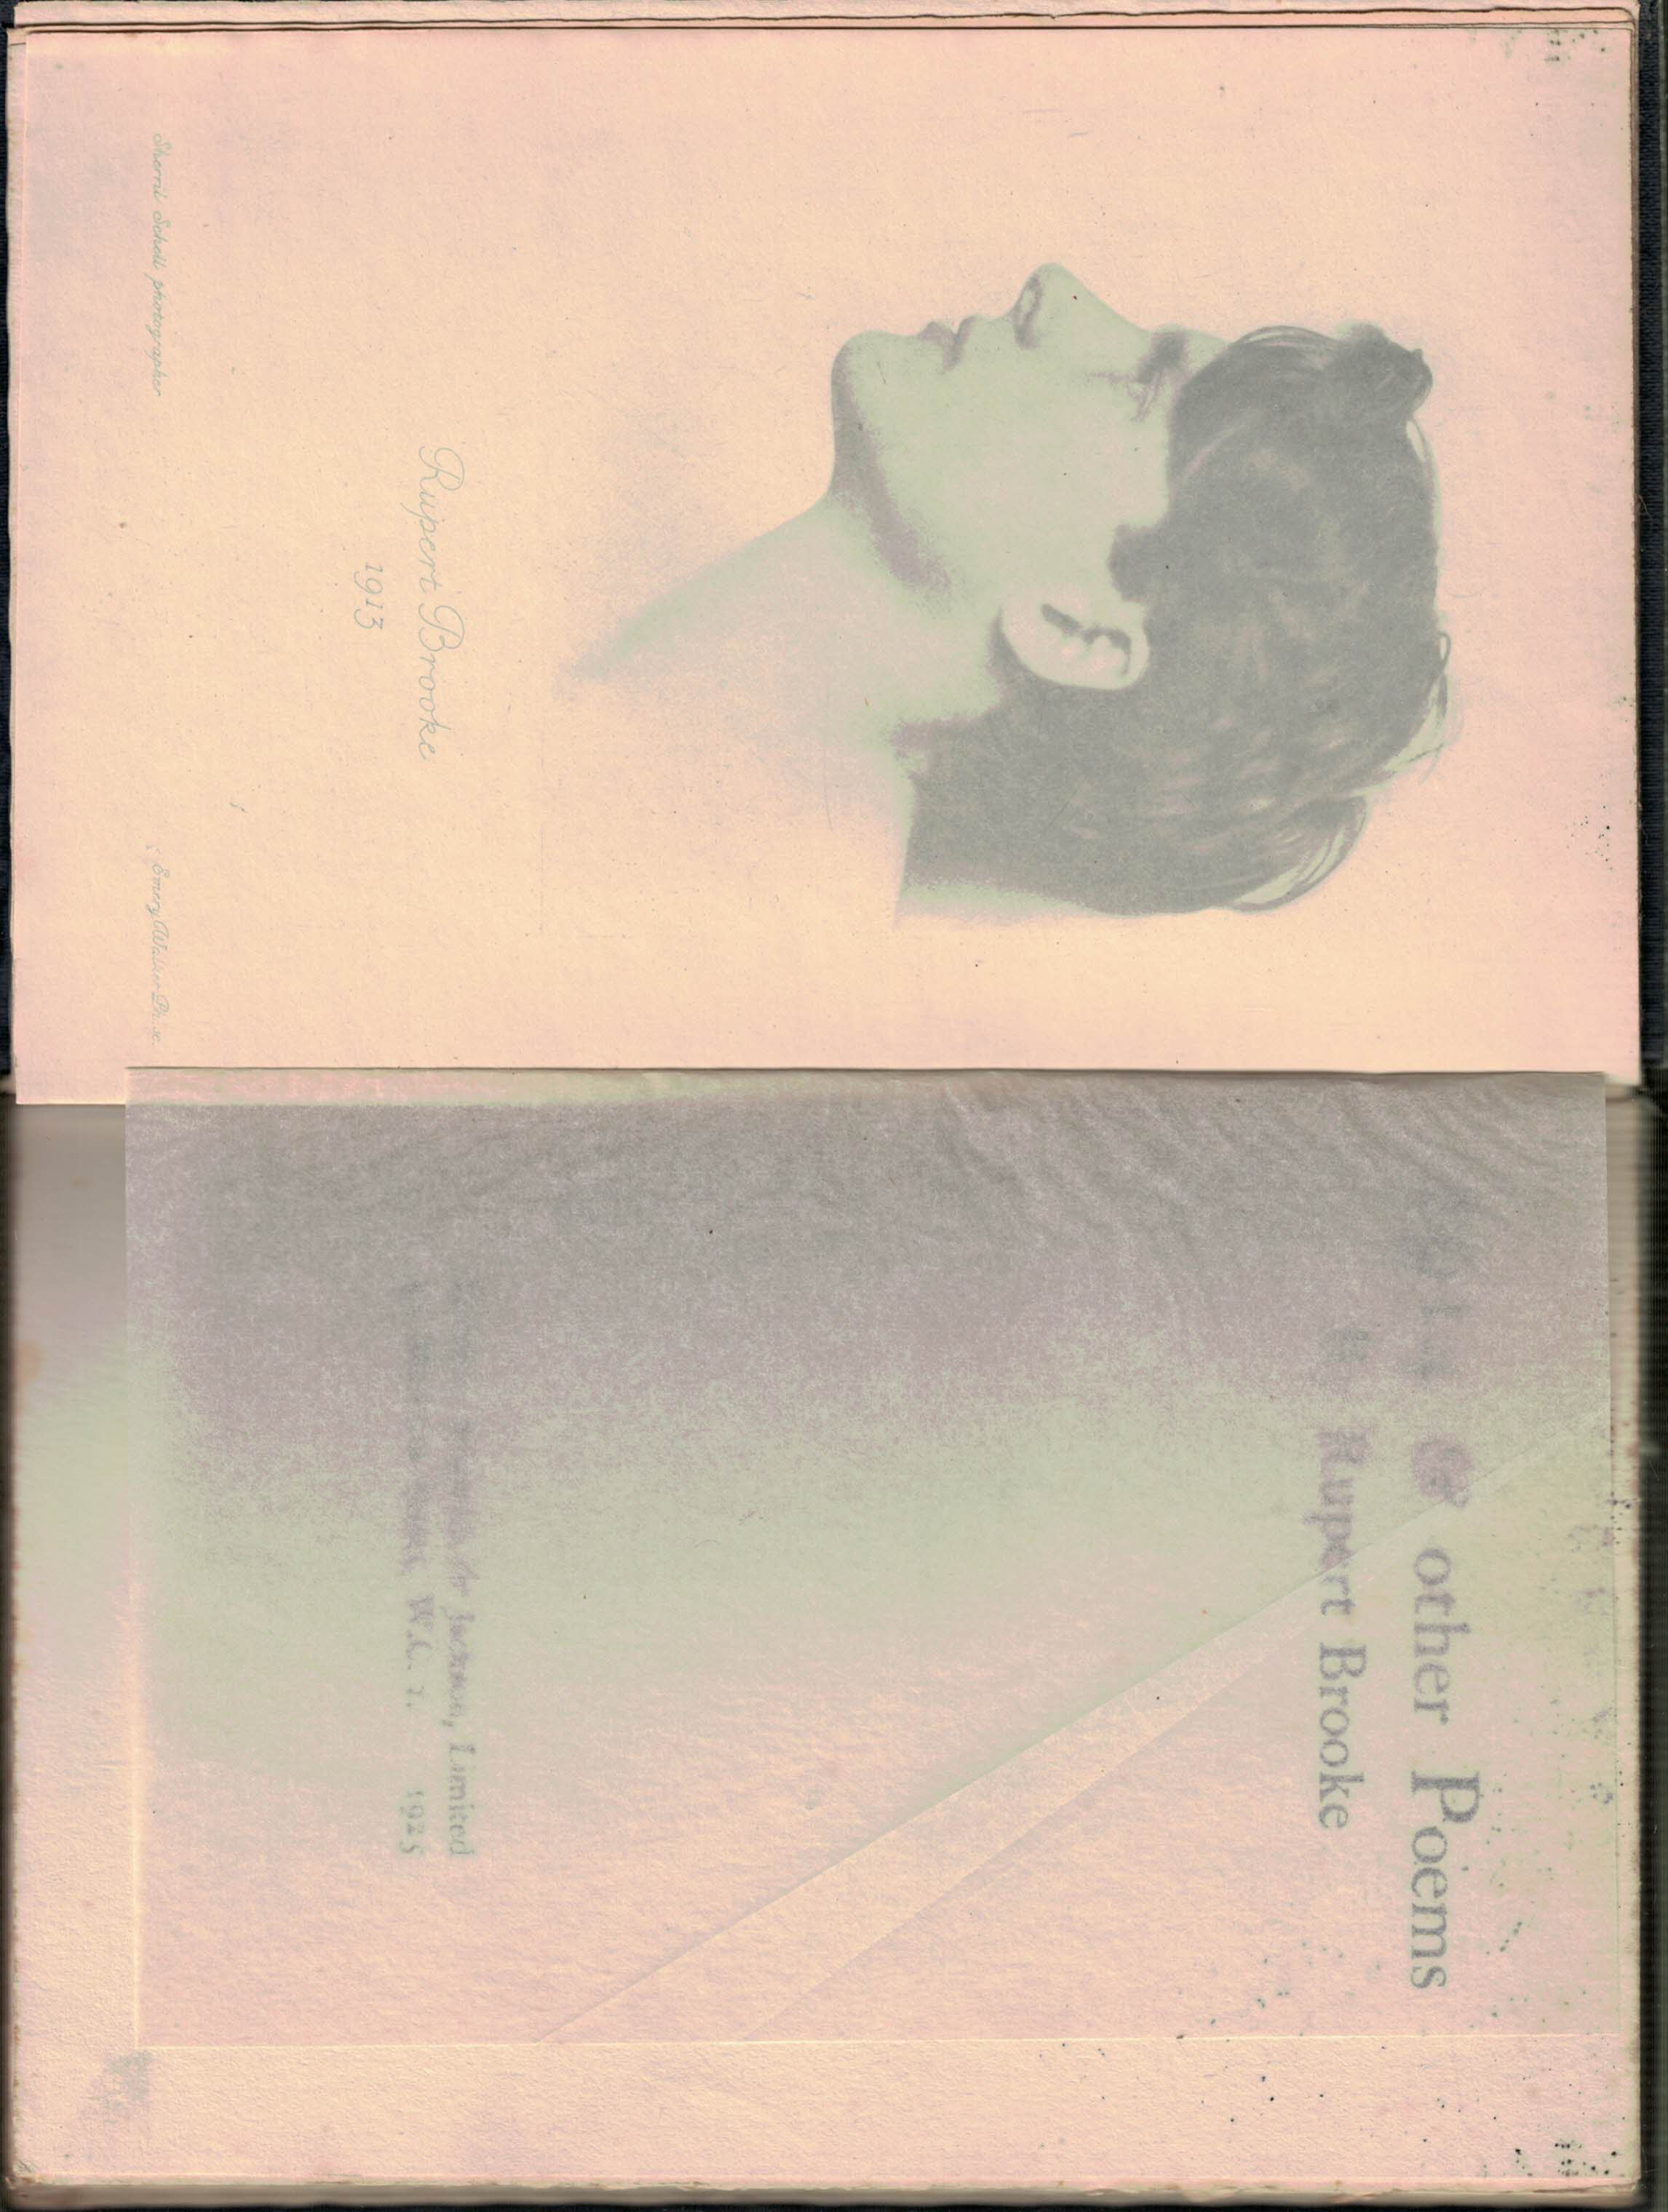 1914 and Other Poems. 1925.